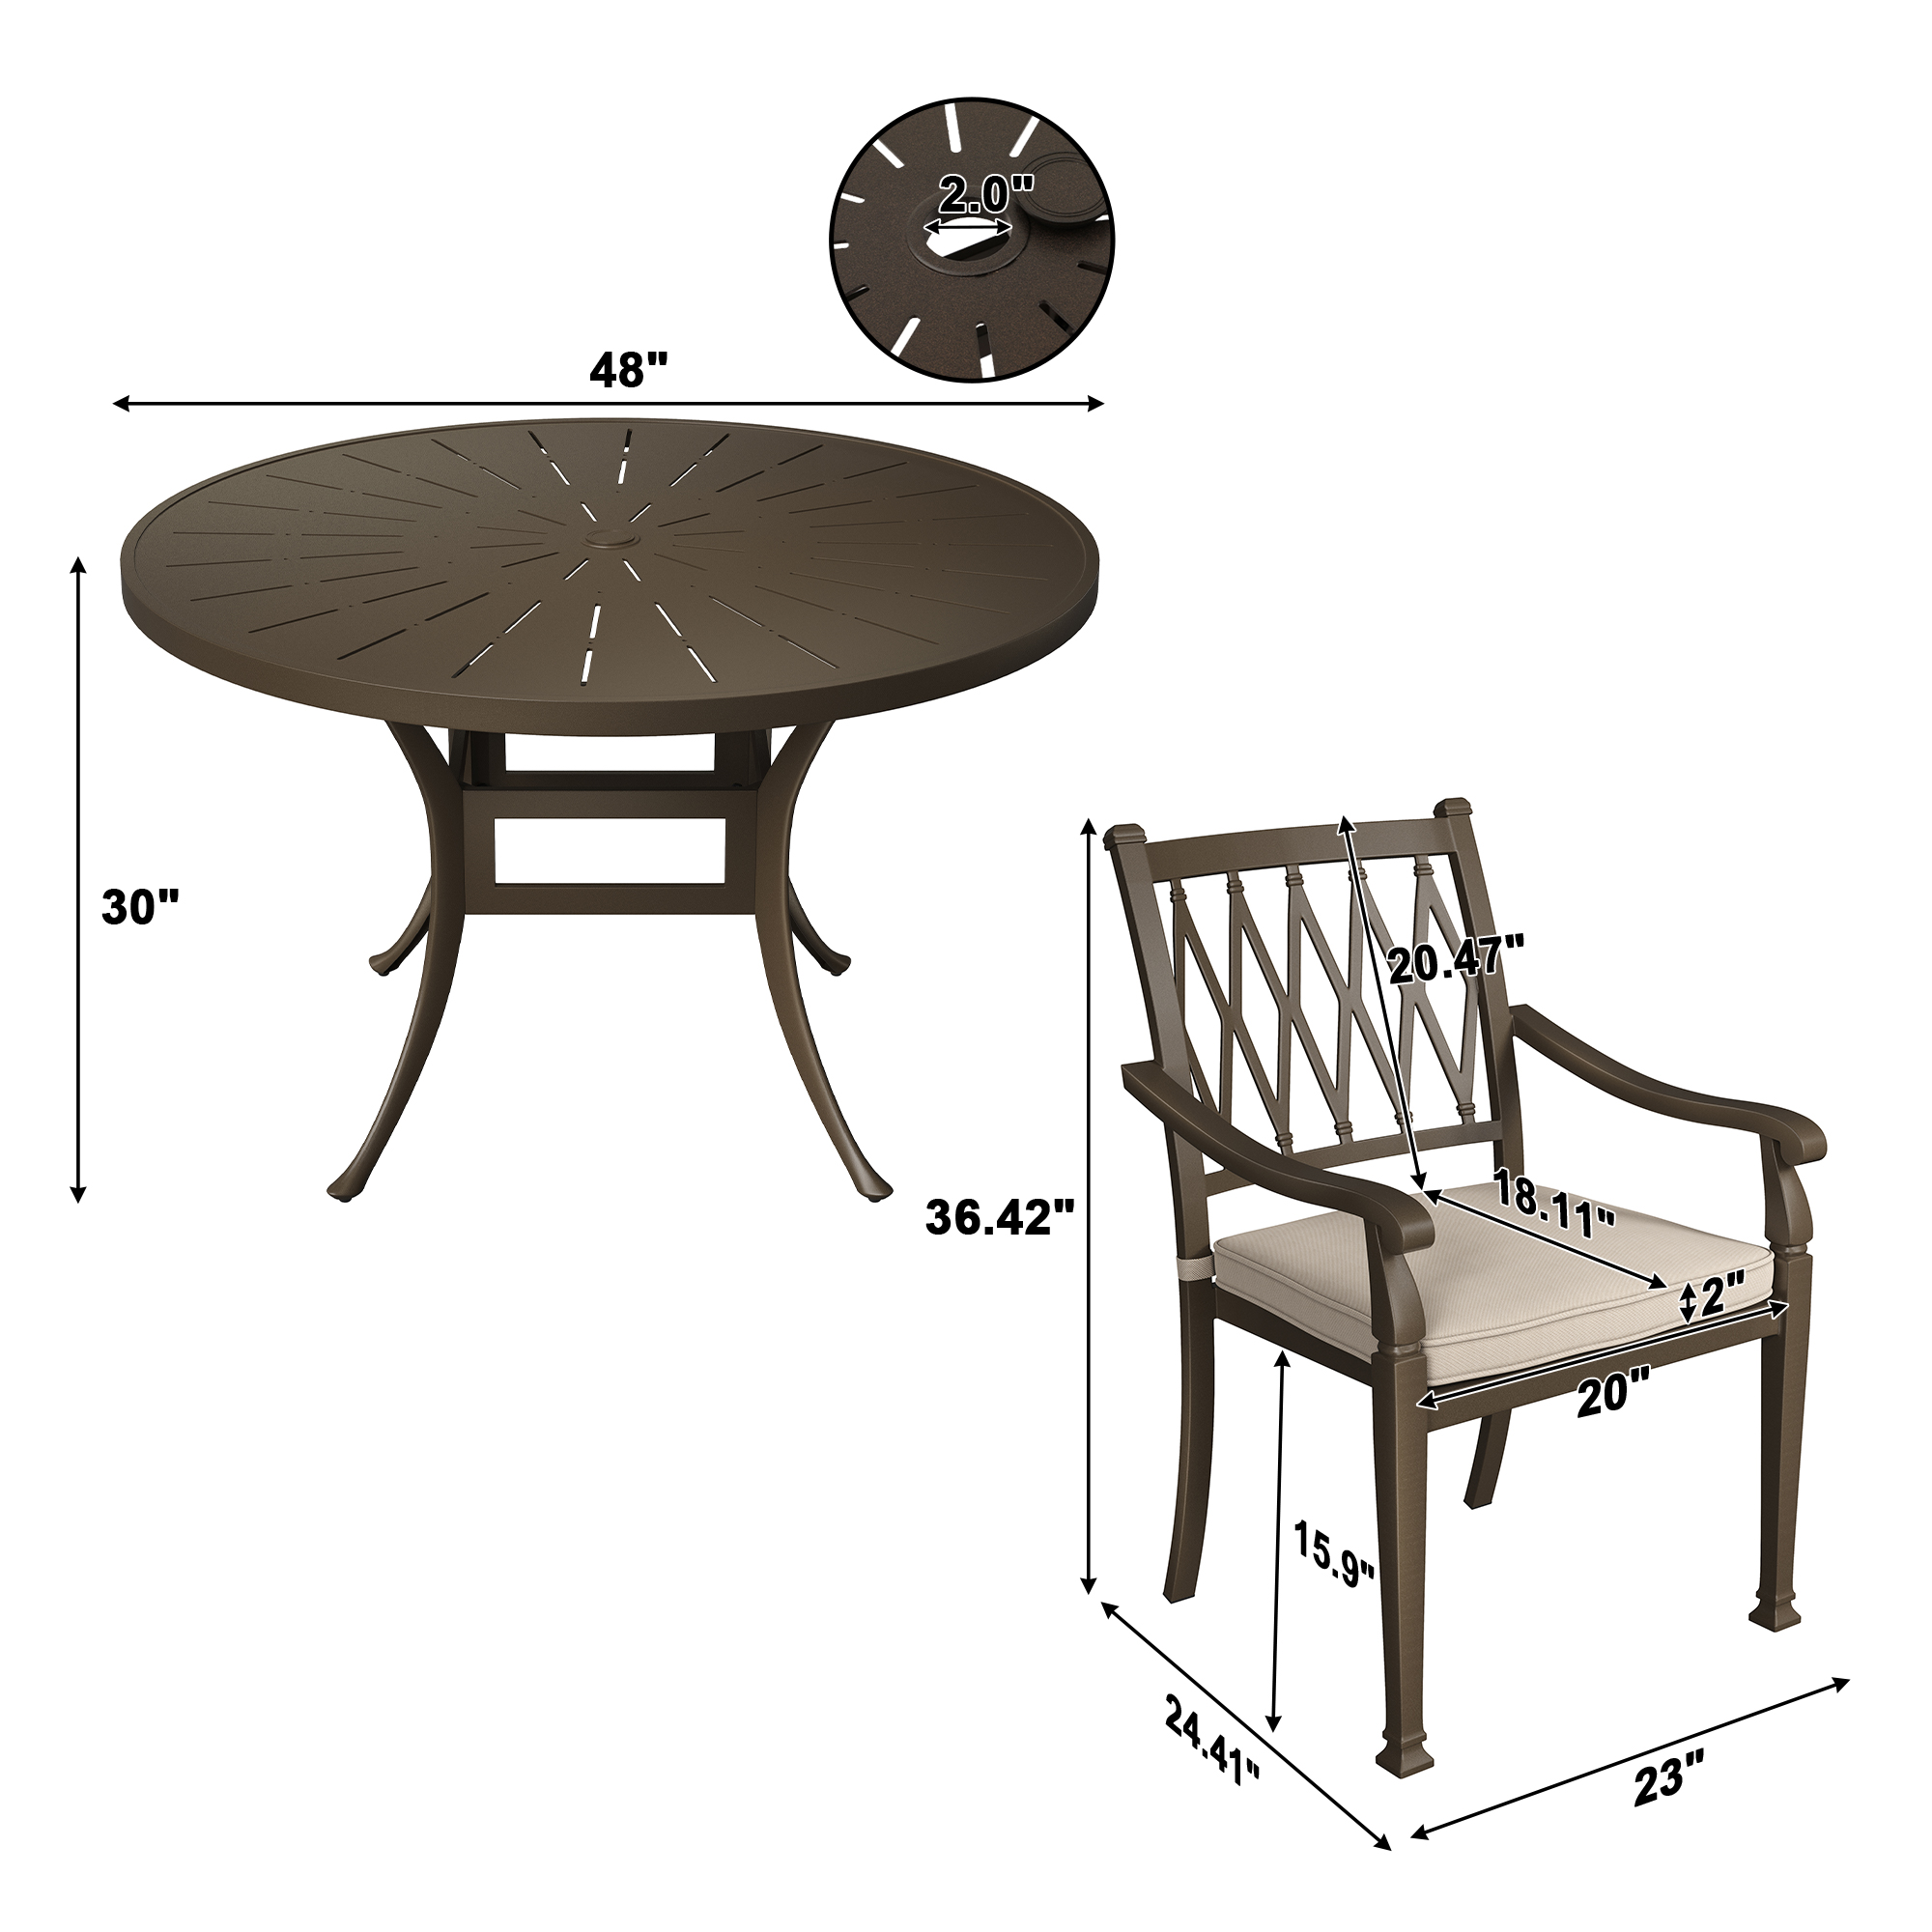 5 Pieces Cast Aluminum Outdoor Dining Set 4 Ergonomic Design Outdoor Chair with Cushions and 1 Round Table with 2.0 Inch Umbrella Hole